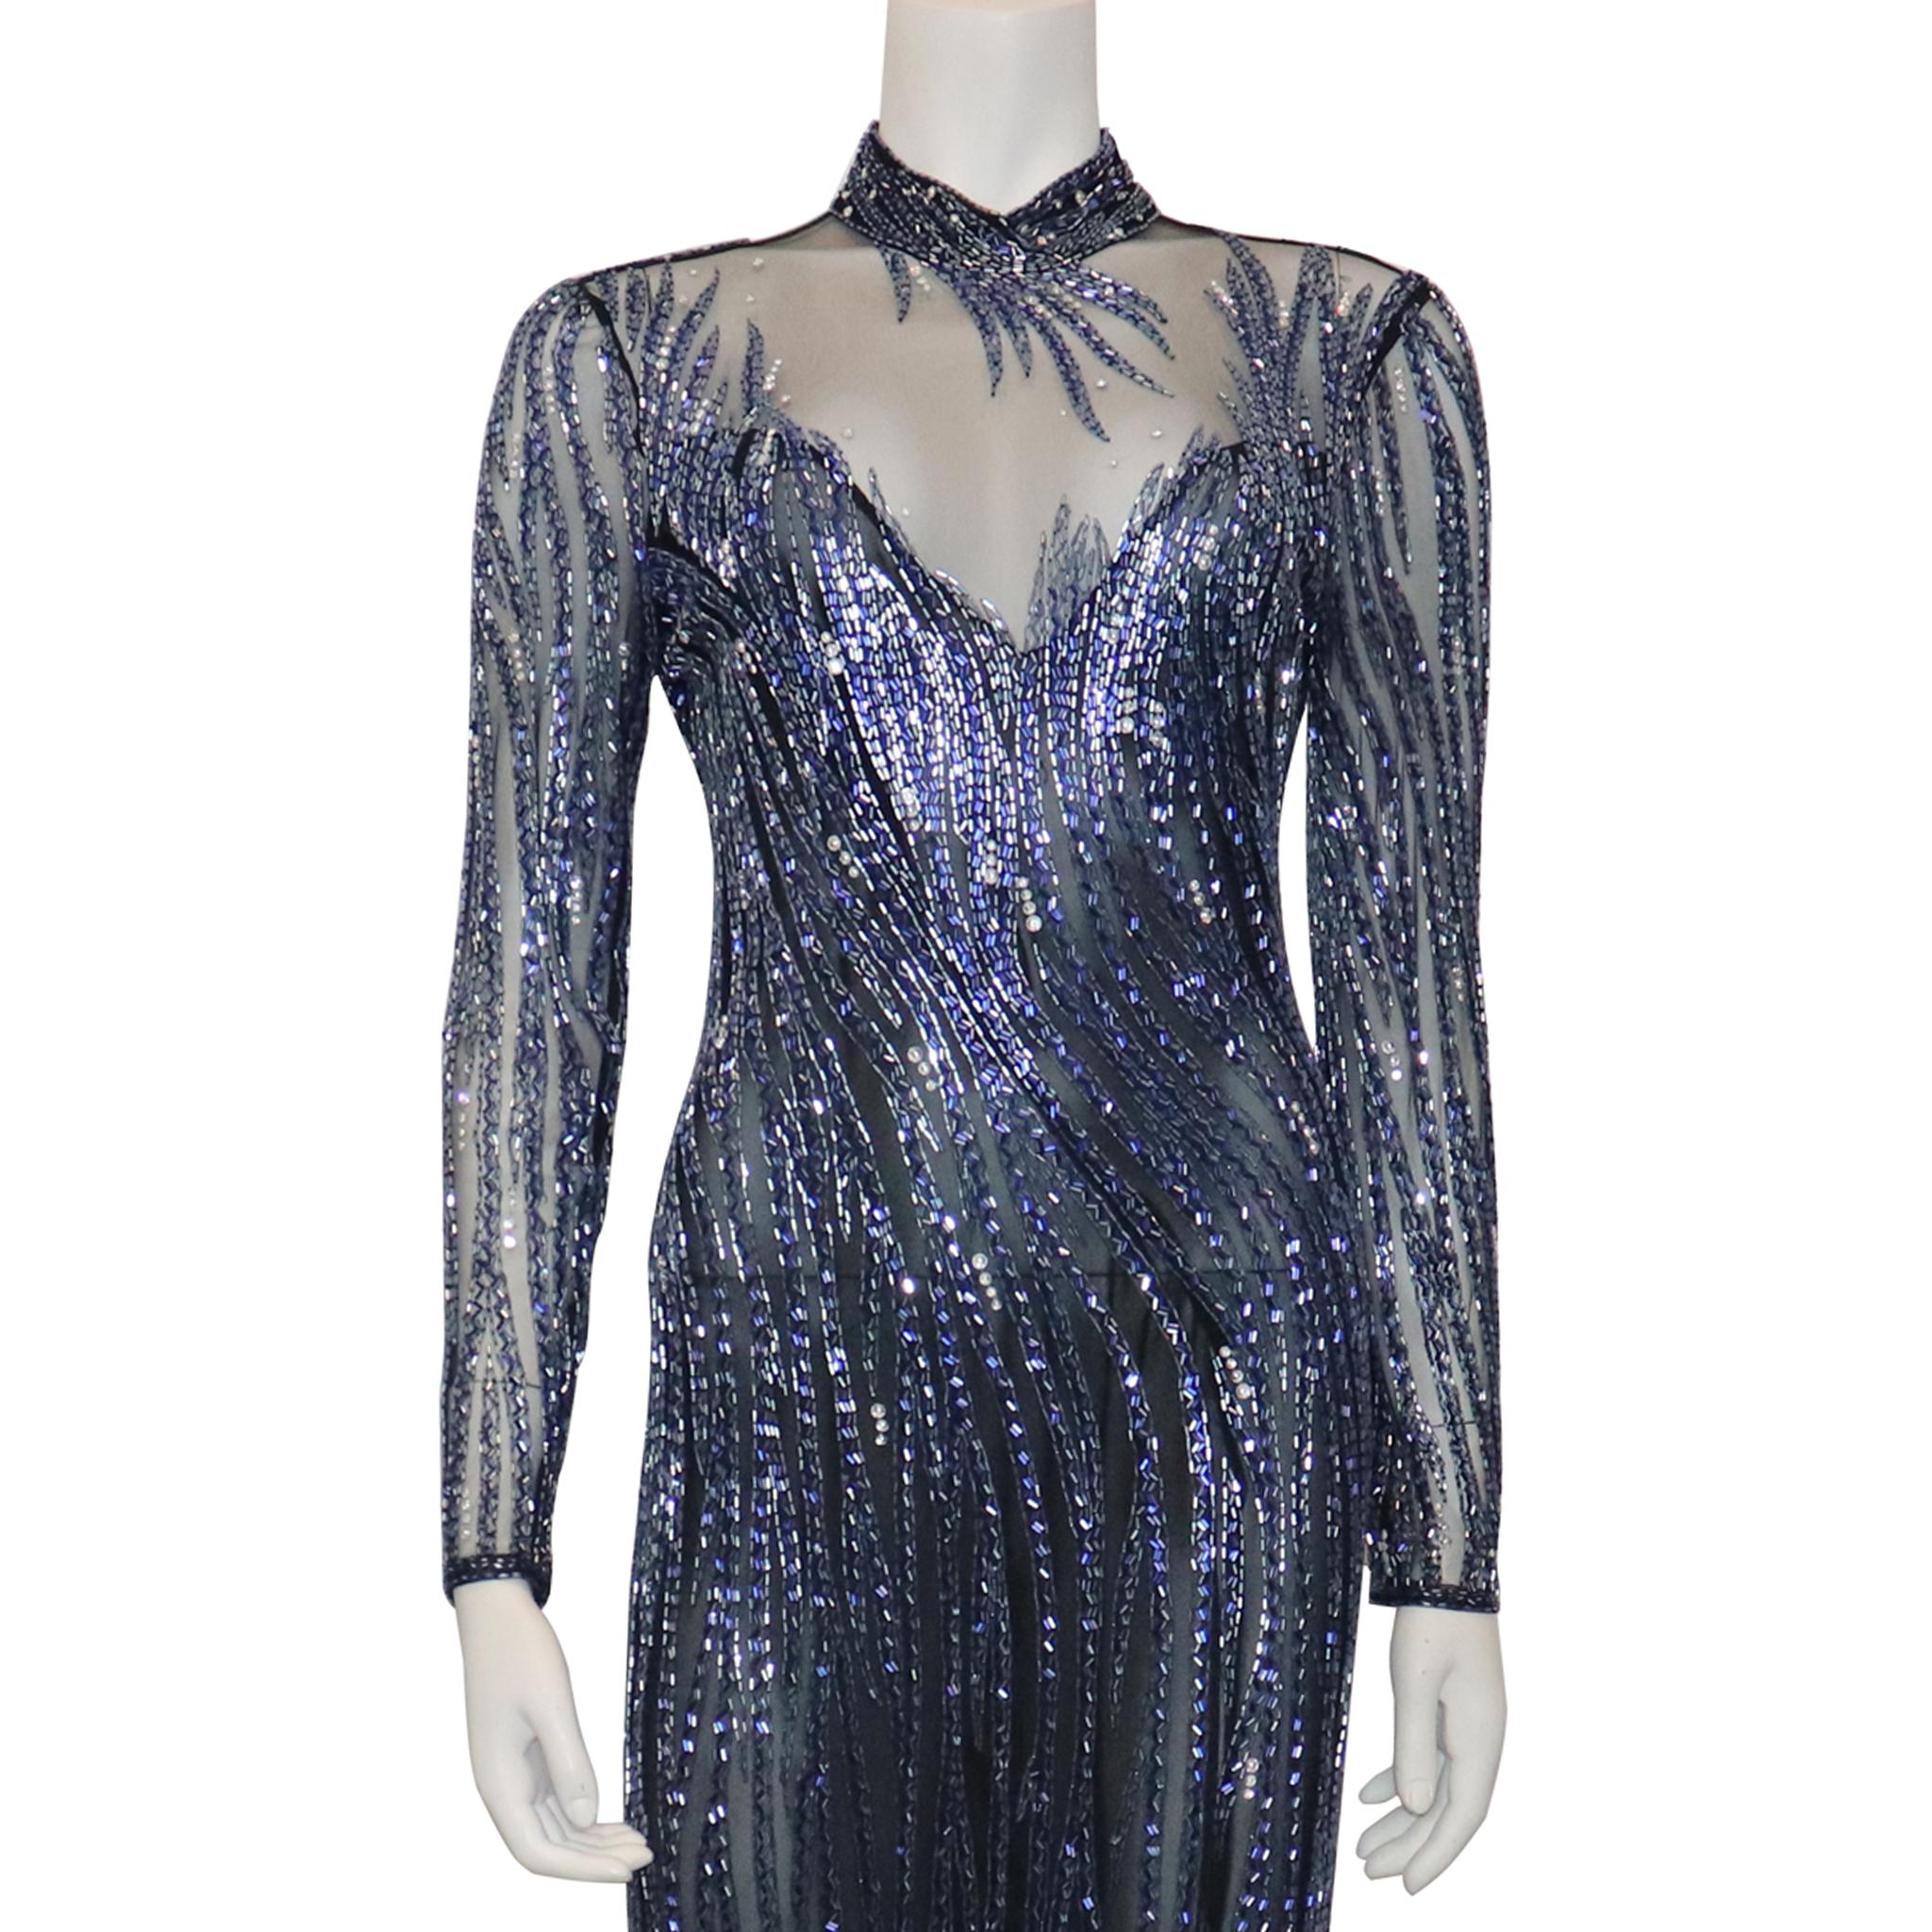 Bob Mackie Black Mesh w/ Blue Beading Long Sleeve High Neck Gown. In excellent condition 

Measurements - 

Size 10 

Dress Length: 61 Inches 
Bust: 24 Inches
Hip: 24 Inches
Shoulder to Arm: 25 Inches 